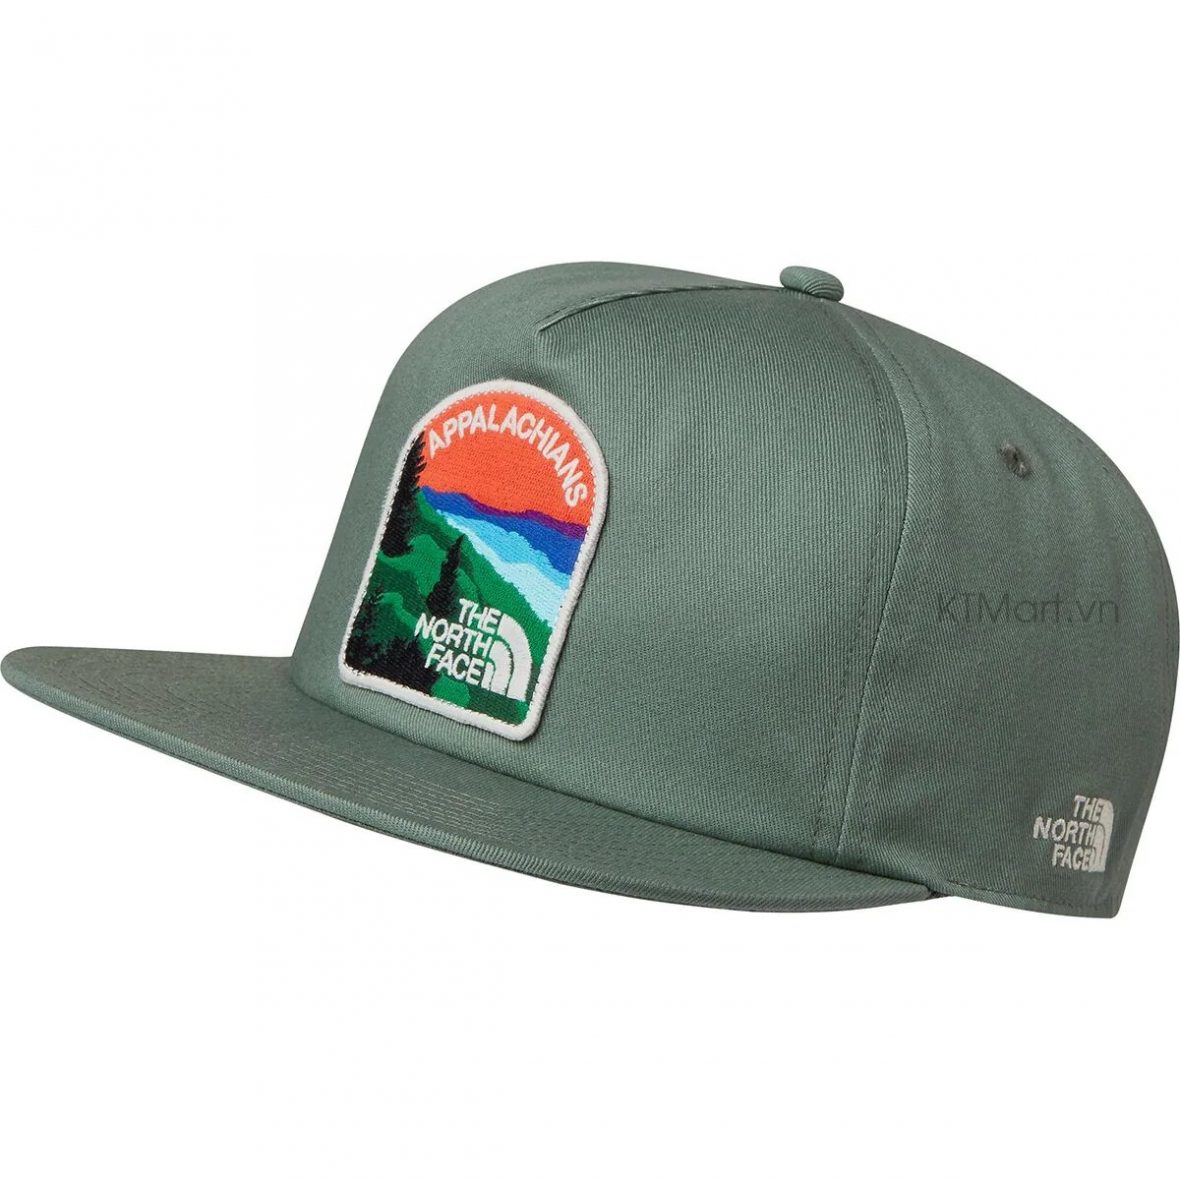 The North Face Embroidered Earthscape Ball Cap NF0A5FW4 ktmart 1